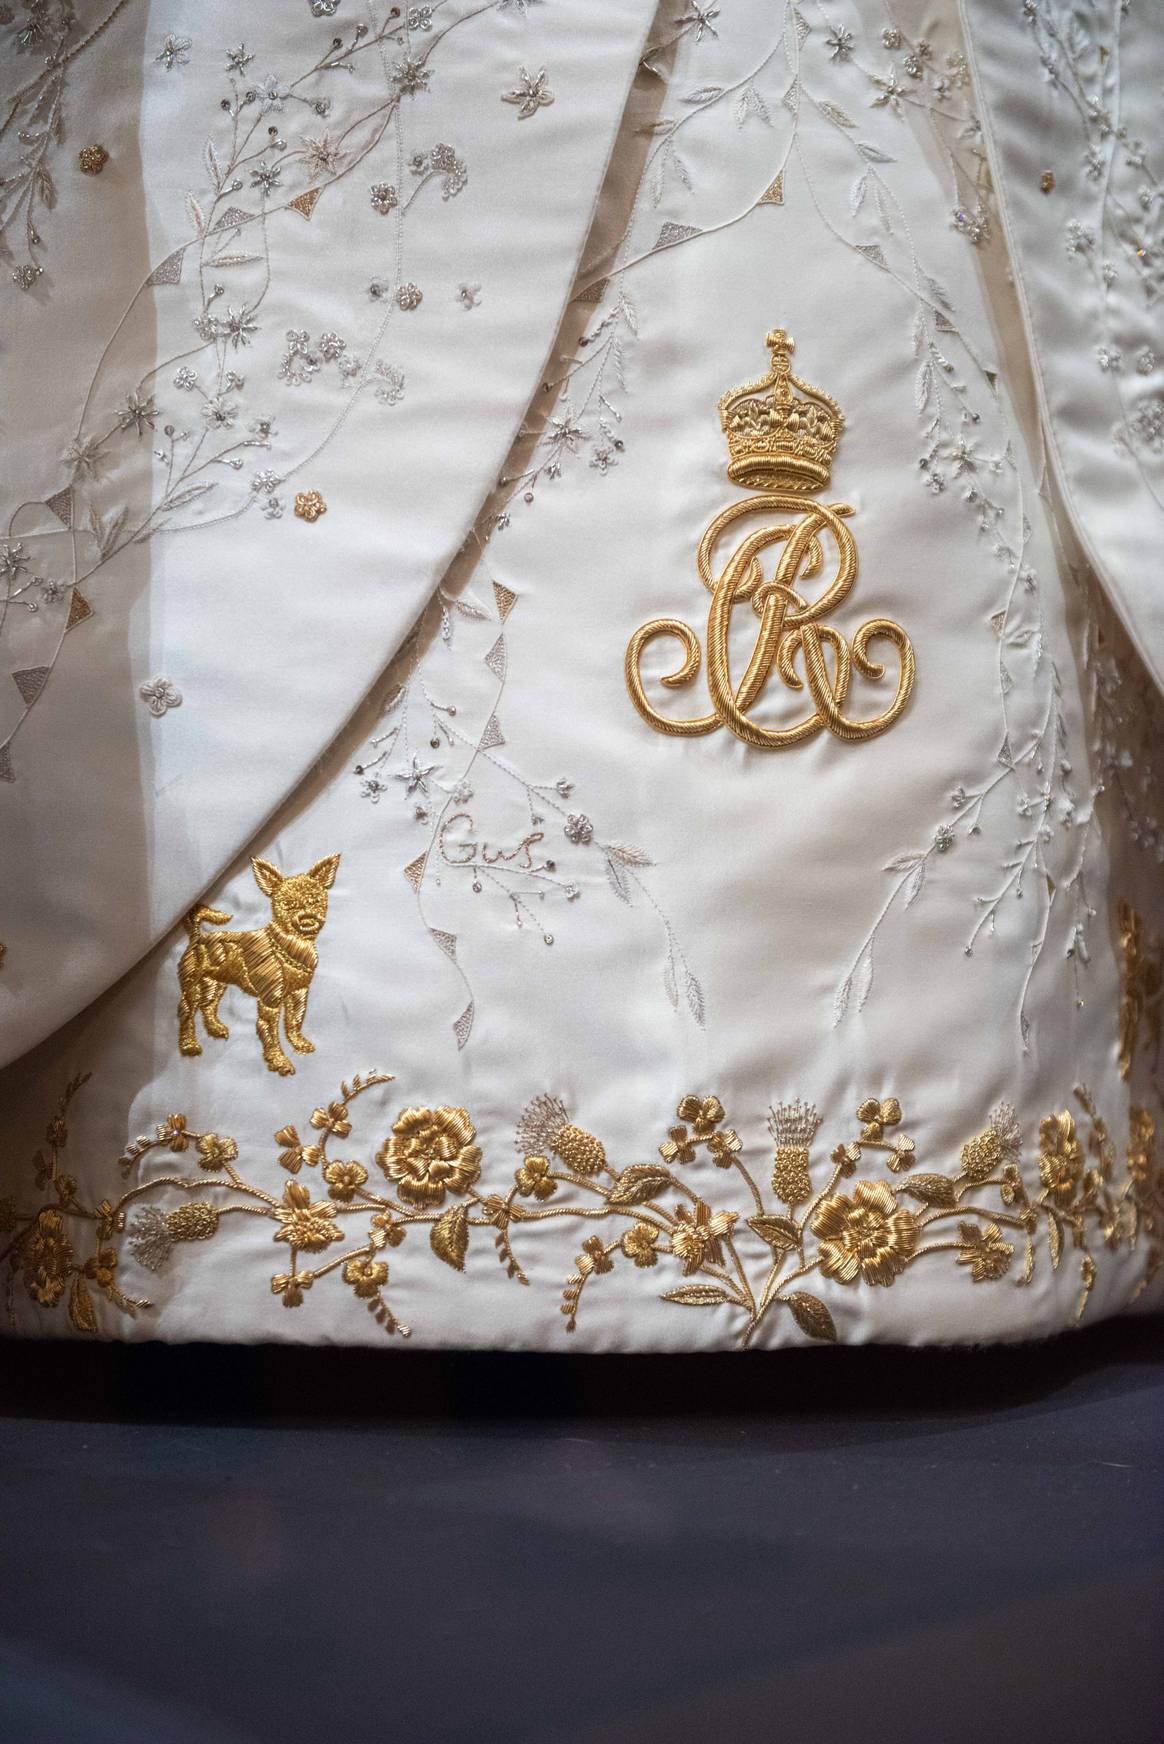 A close-up of embroidered details on The Queen’s Coronation Dress, including one of Her Majesty’s Jack Russell Terriers and the name of one of her grandchildren